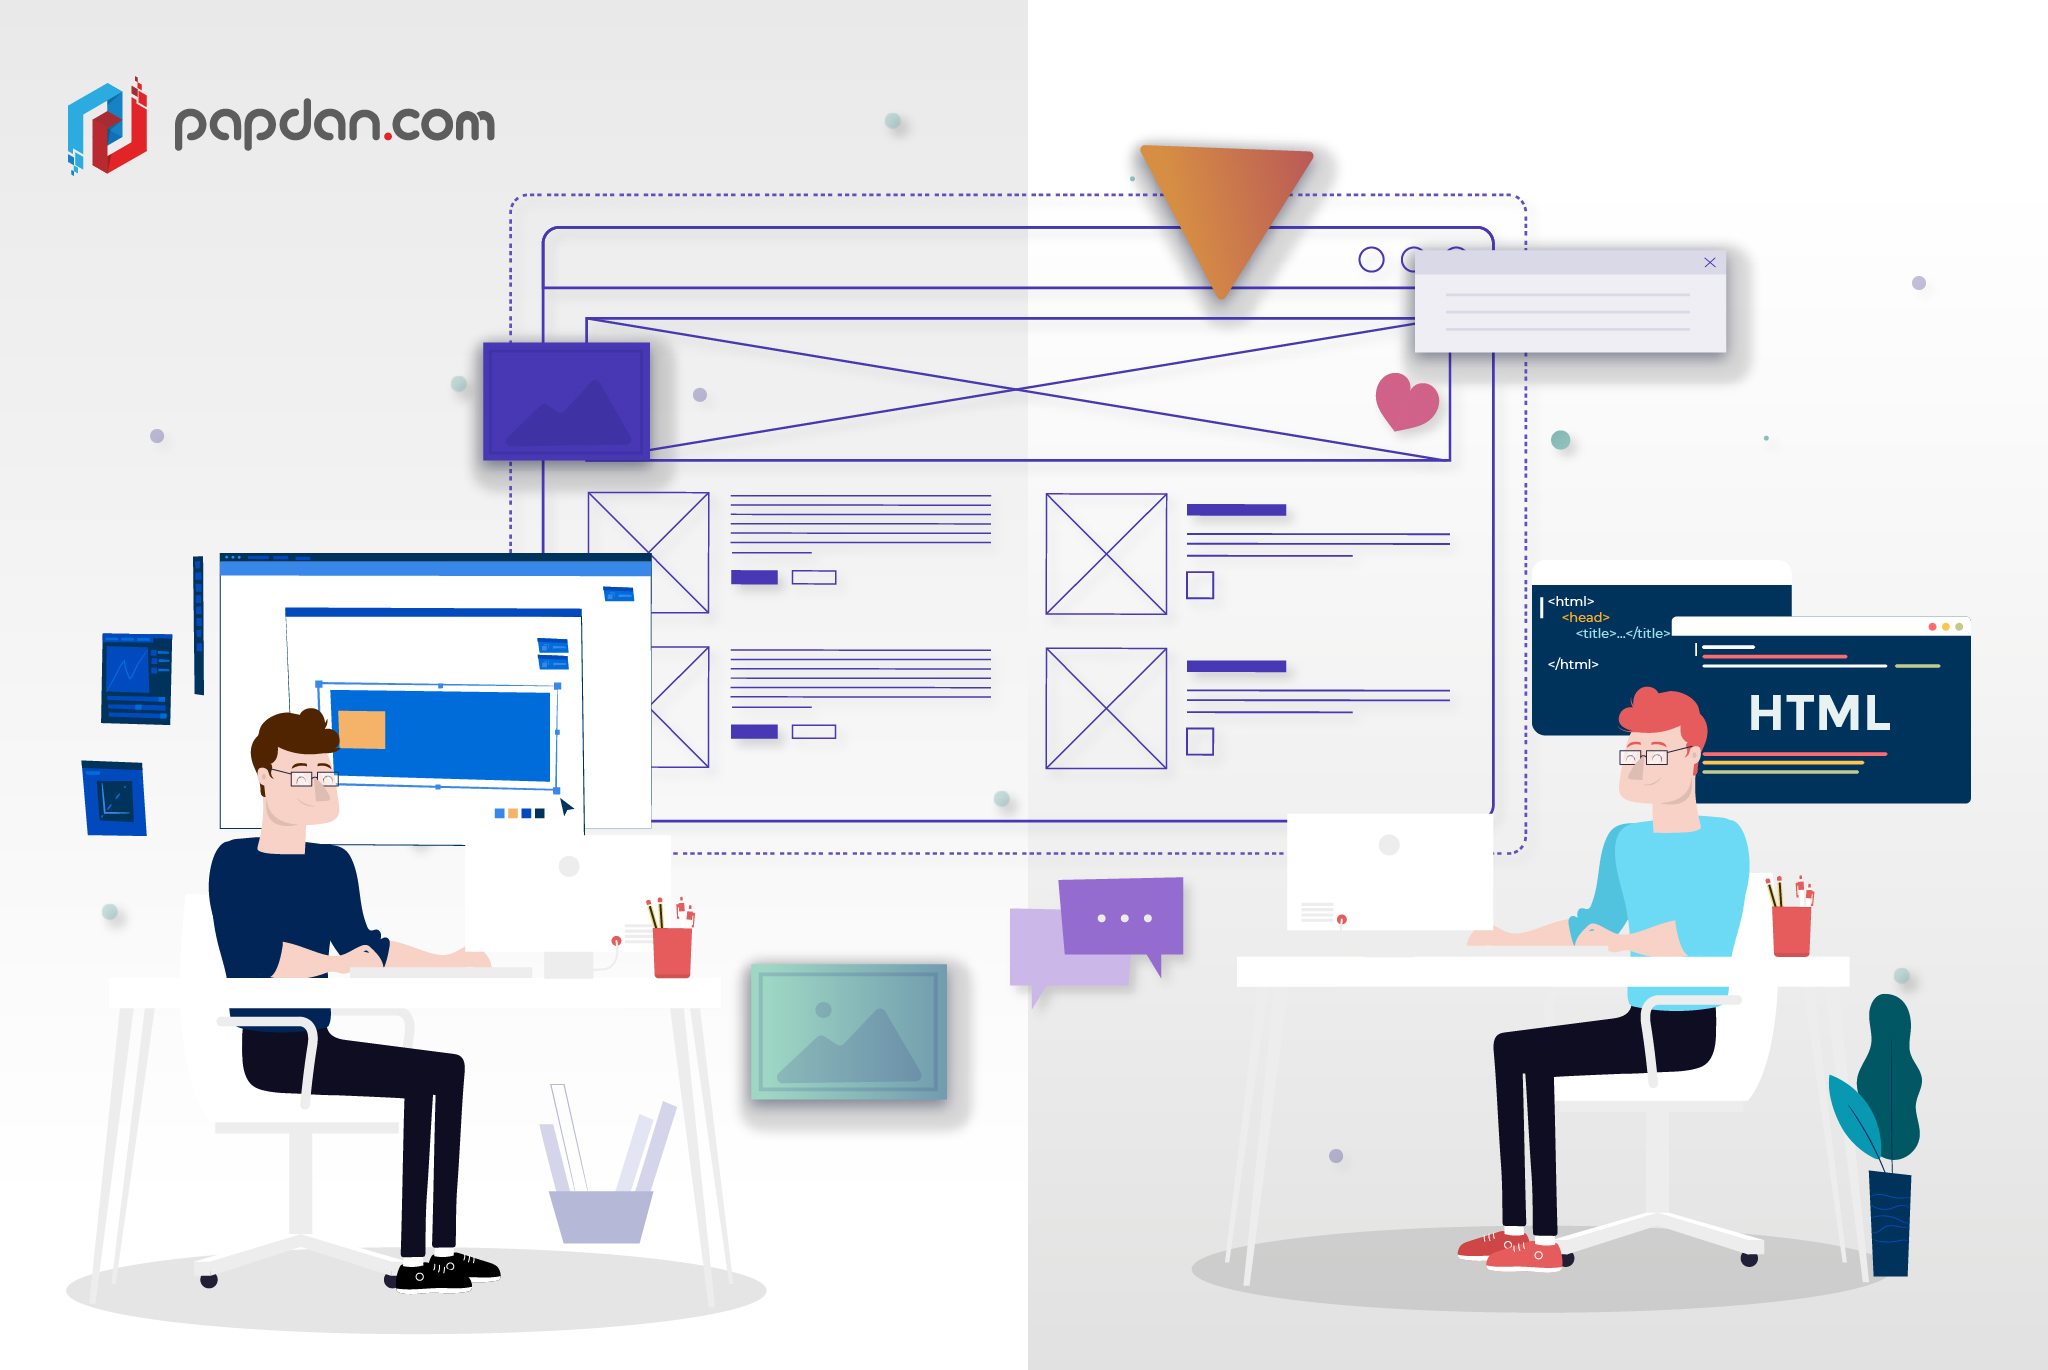 Similar but Not the Same: What Makes Web Developer and Web Designer Different?